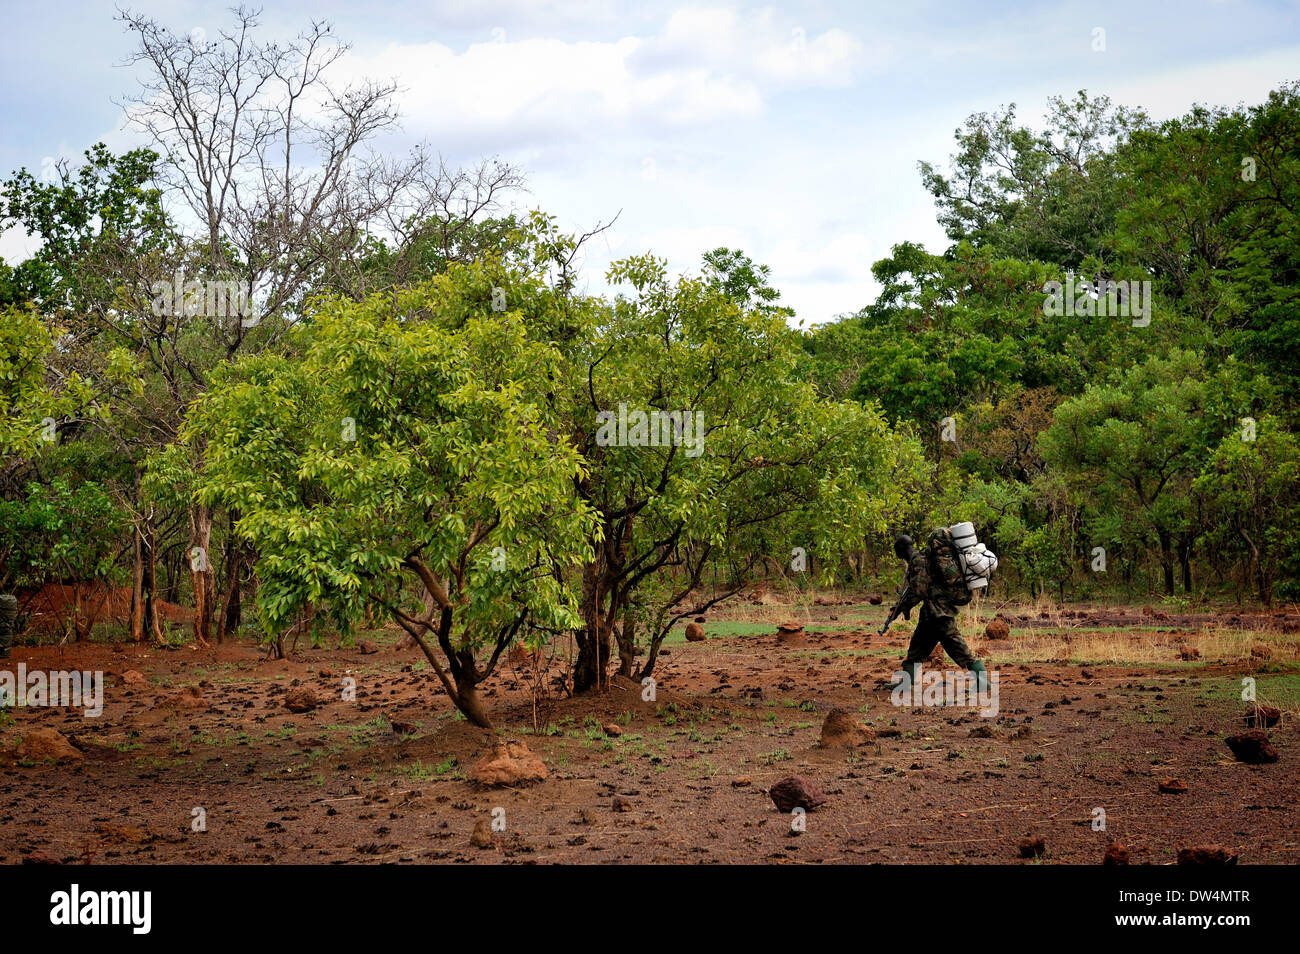 Ugandan soldiers of the Uganda People's Defence Force (UPDF) patrol through the Central African jungle during an operation to hunt notorious Lord's Resistance Army (LRA) leader Joseph Kony. The LRA is a Christian militant rebel group. Stock Photo